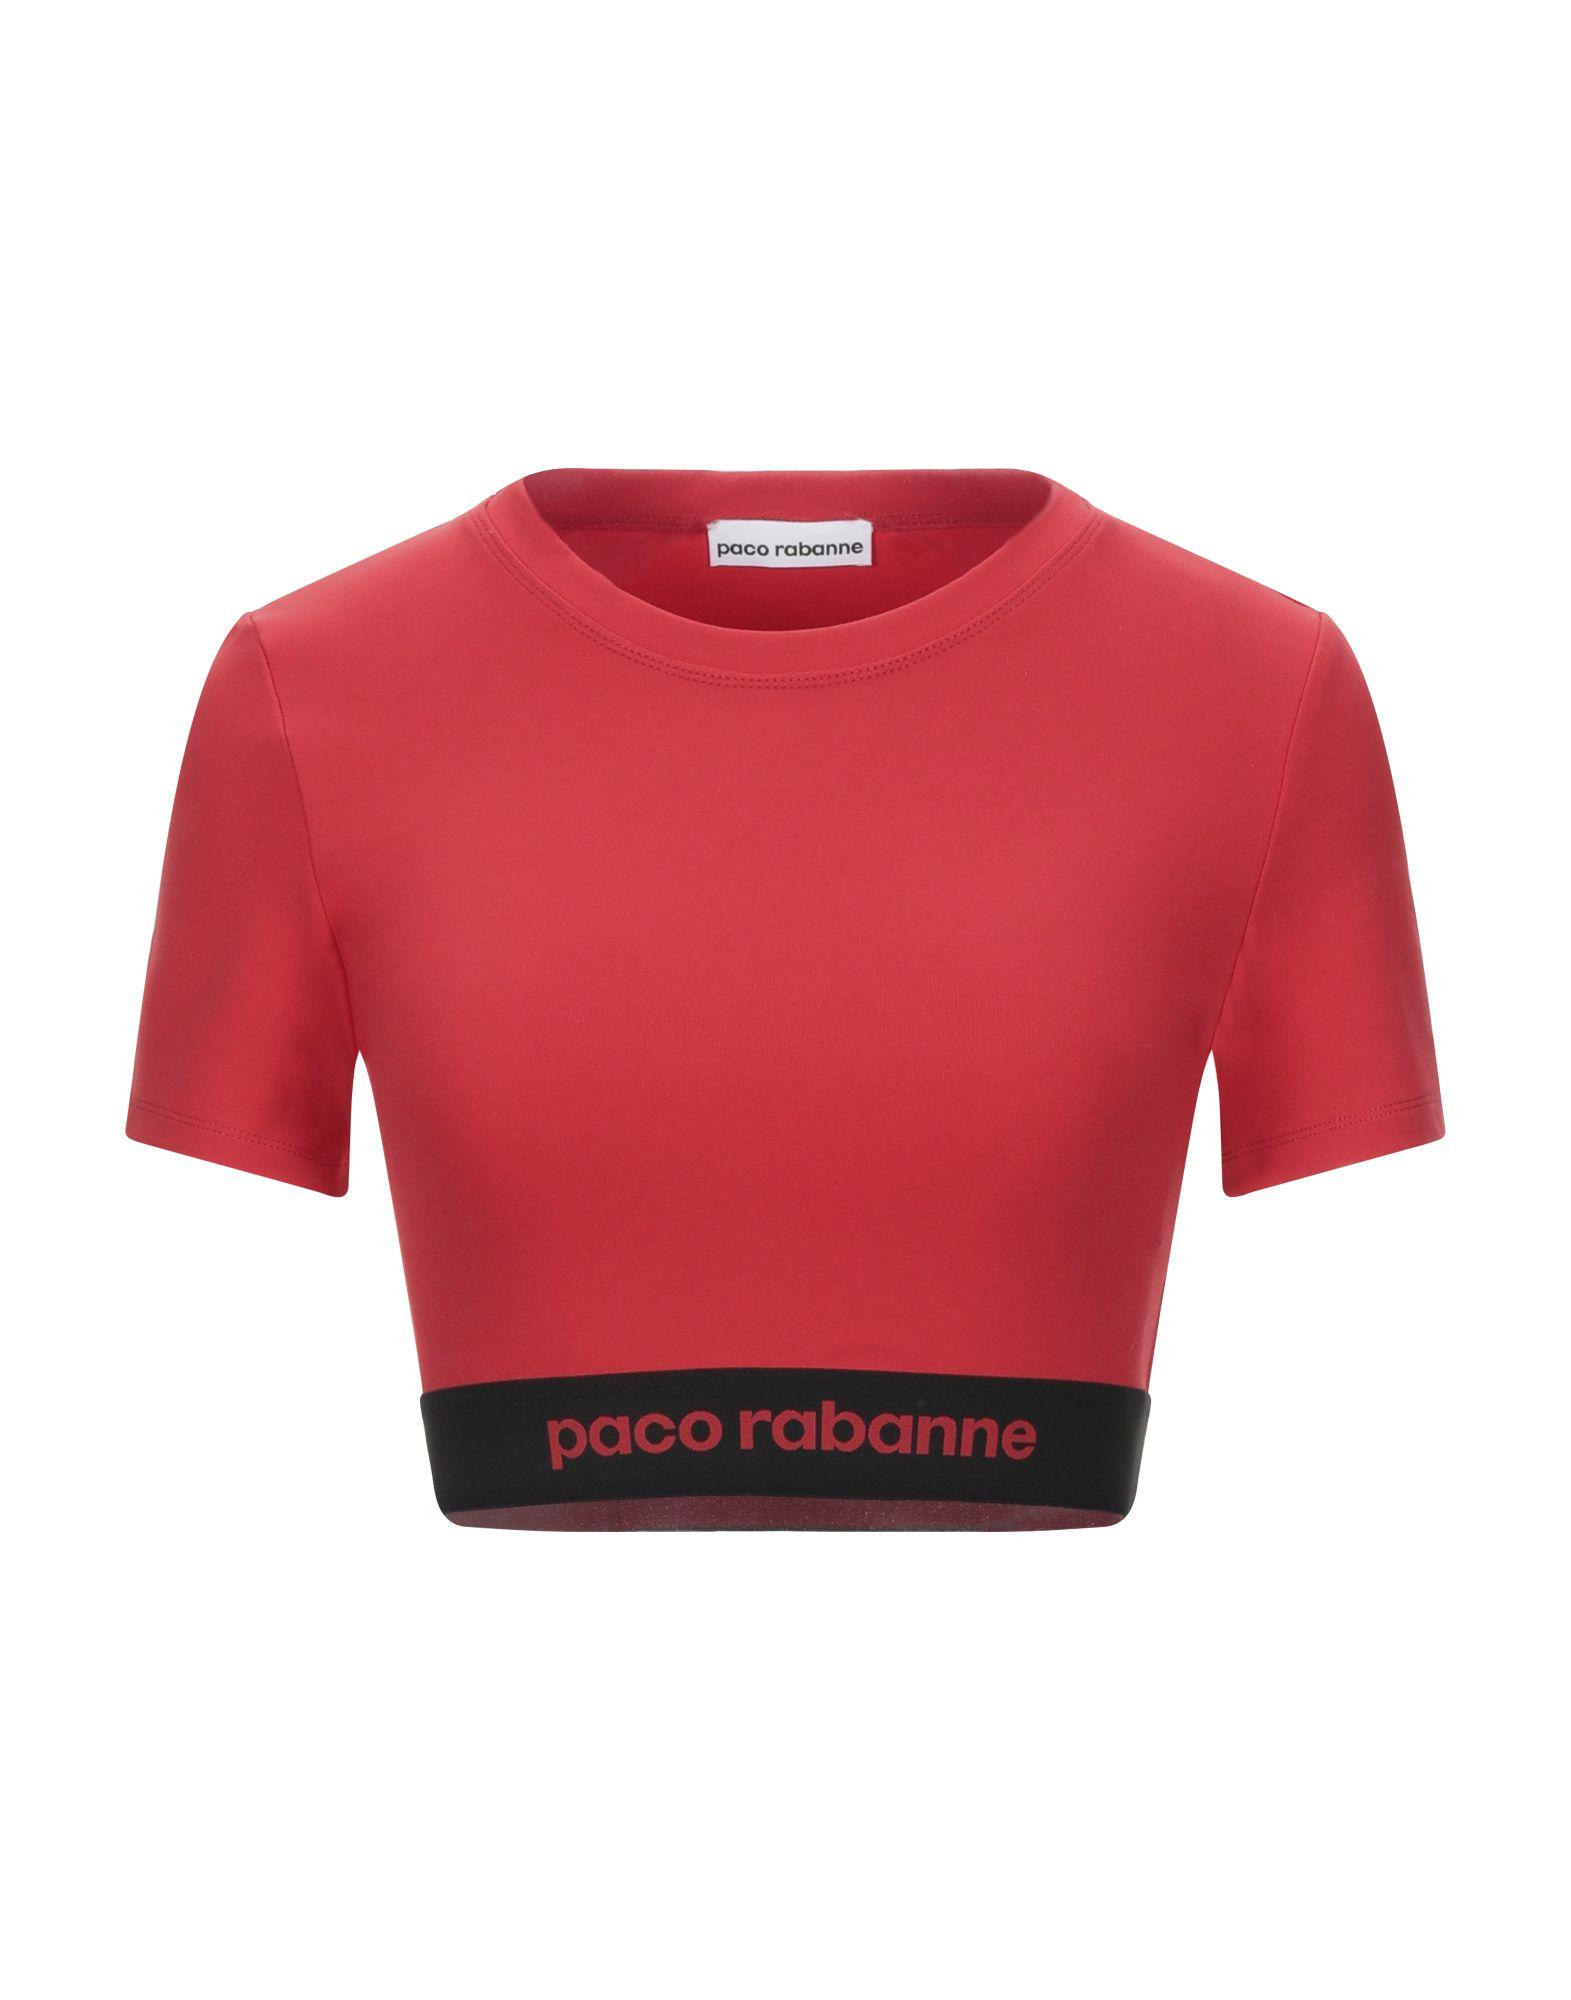 Paco Rabanne Synthetic T-shirt in Red - Lyst